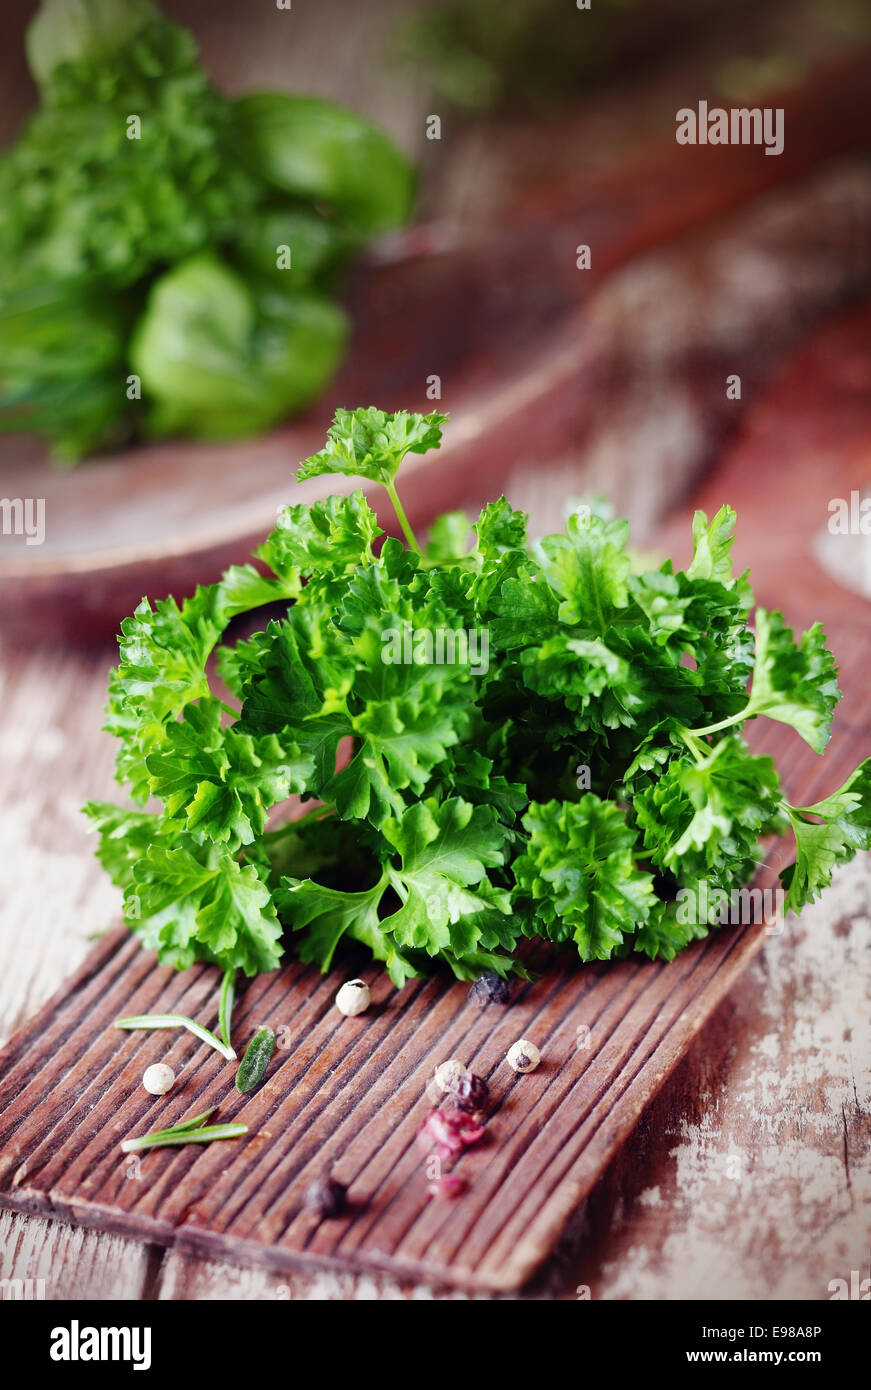 Bunch of fresh crinkly leafed parsley lying on a rustic wooden chopping board on a grunge wooden kitchen table Stock Photo